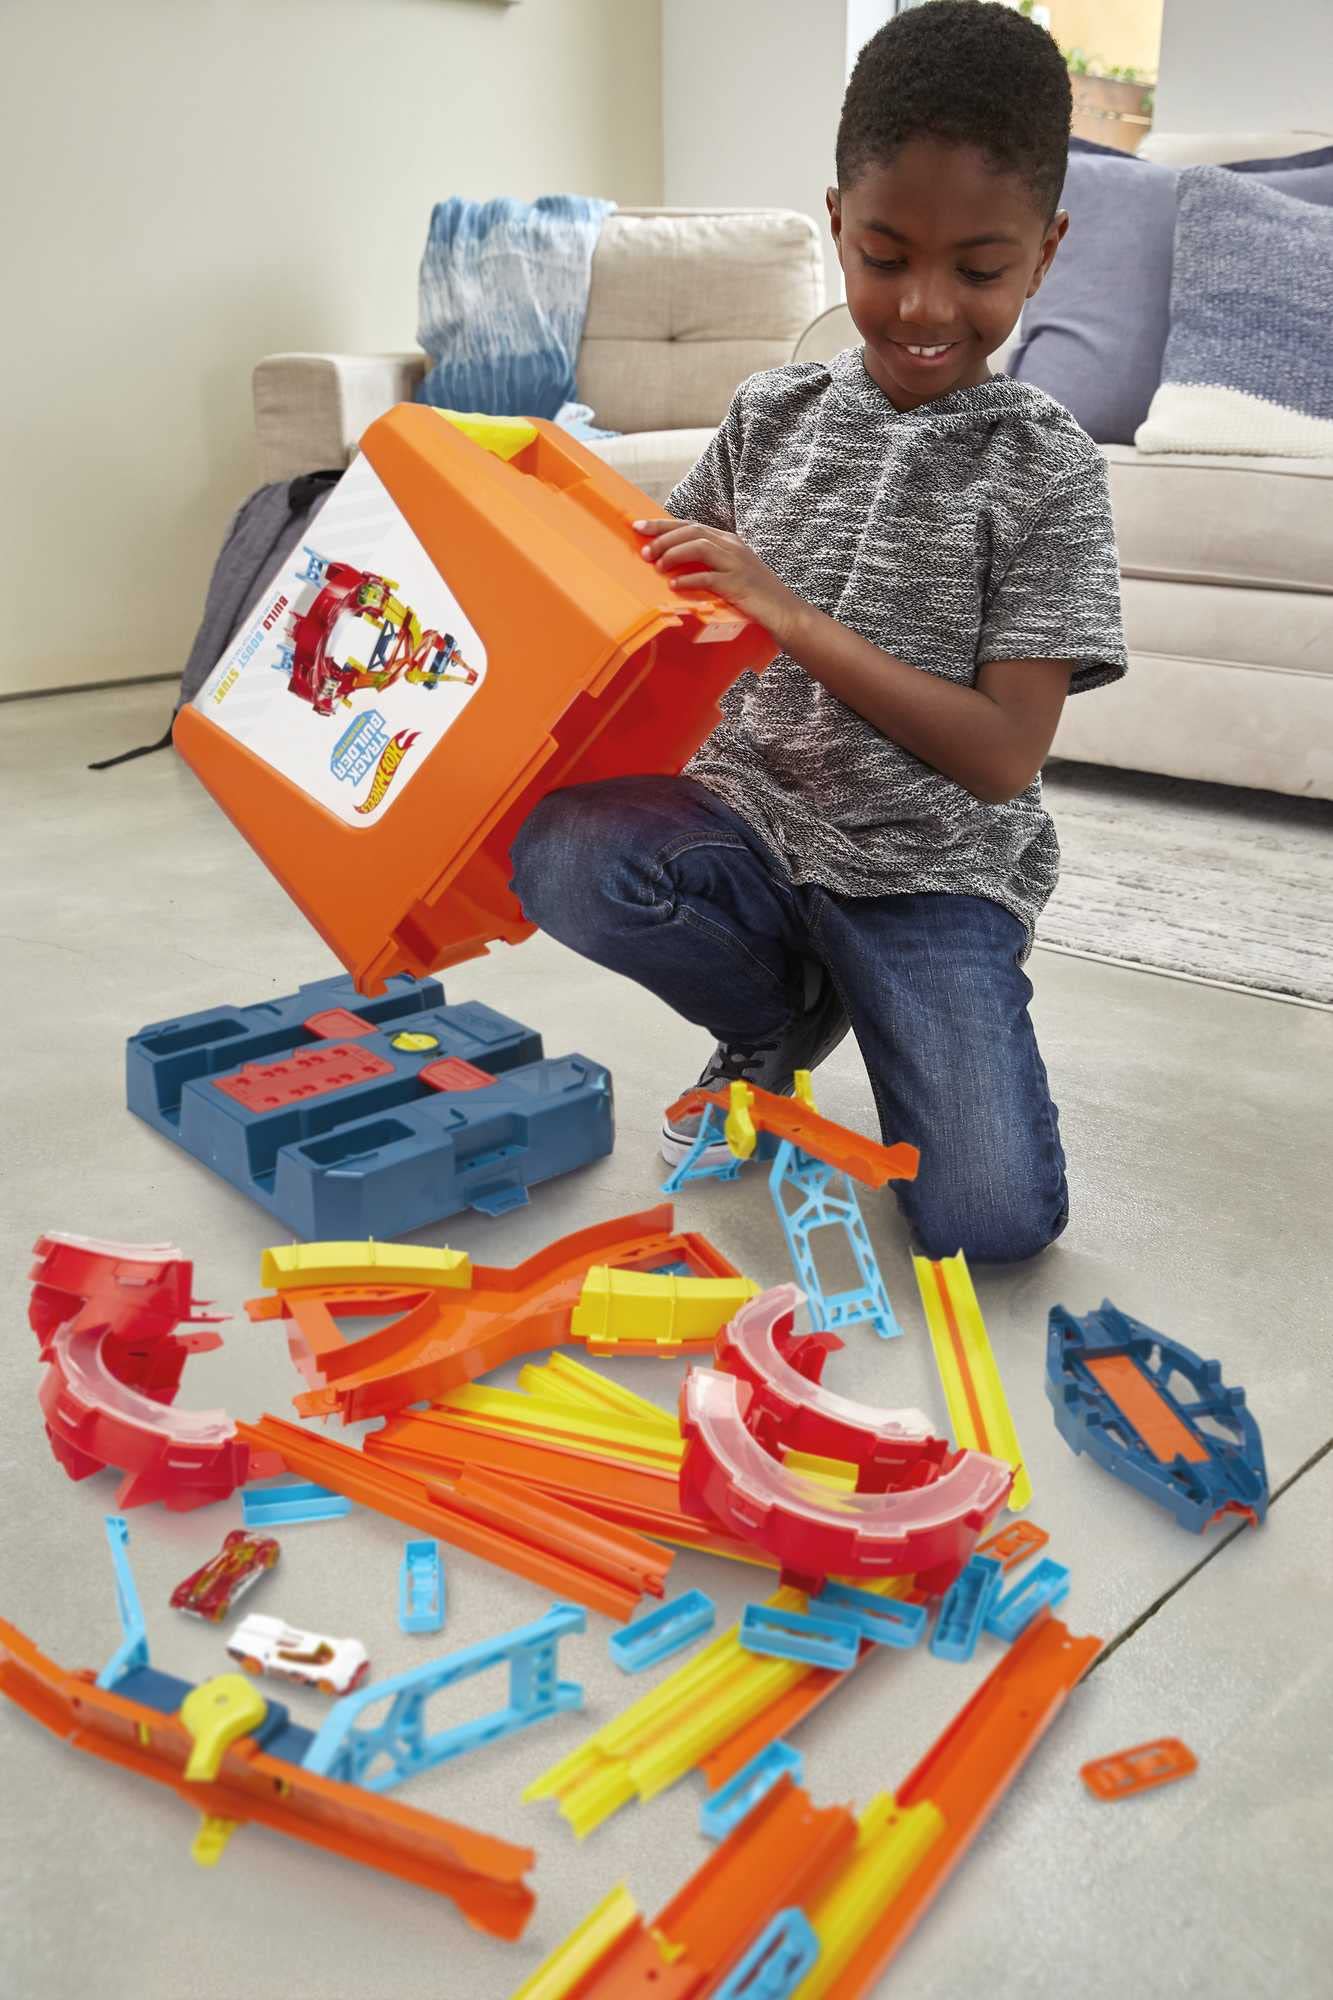 Hot Wheels Track Builder Unlimited Power Boost Box Compatible id Four Plus Builds 20 feet of Track Gift idea for Kids 6, 7, 8, 9, 10 and Older